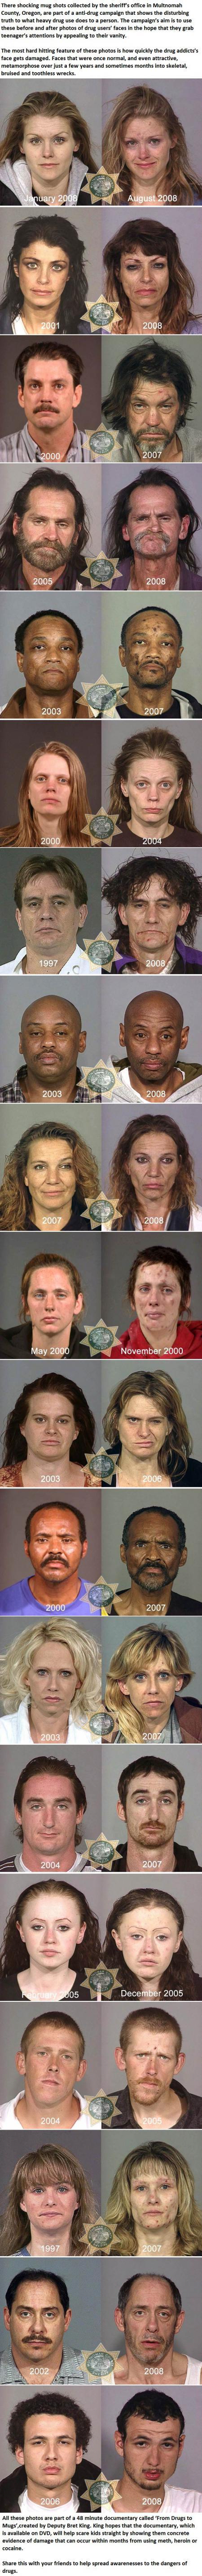 before and after photos of drug abuse